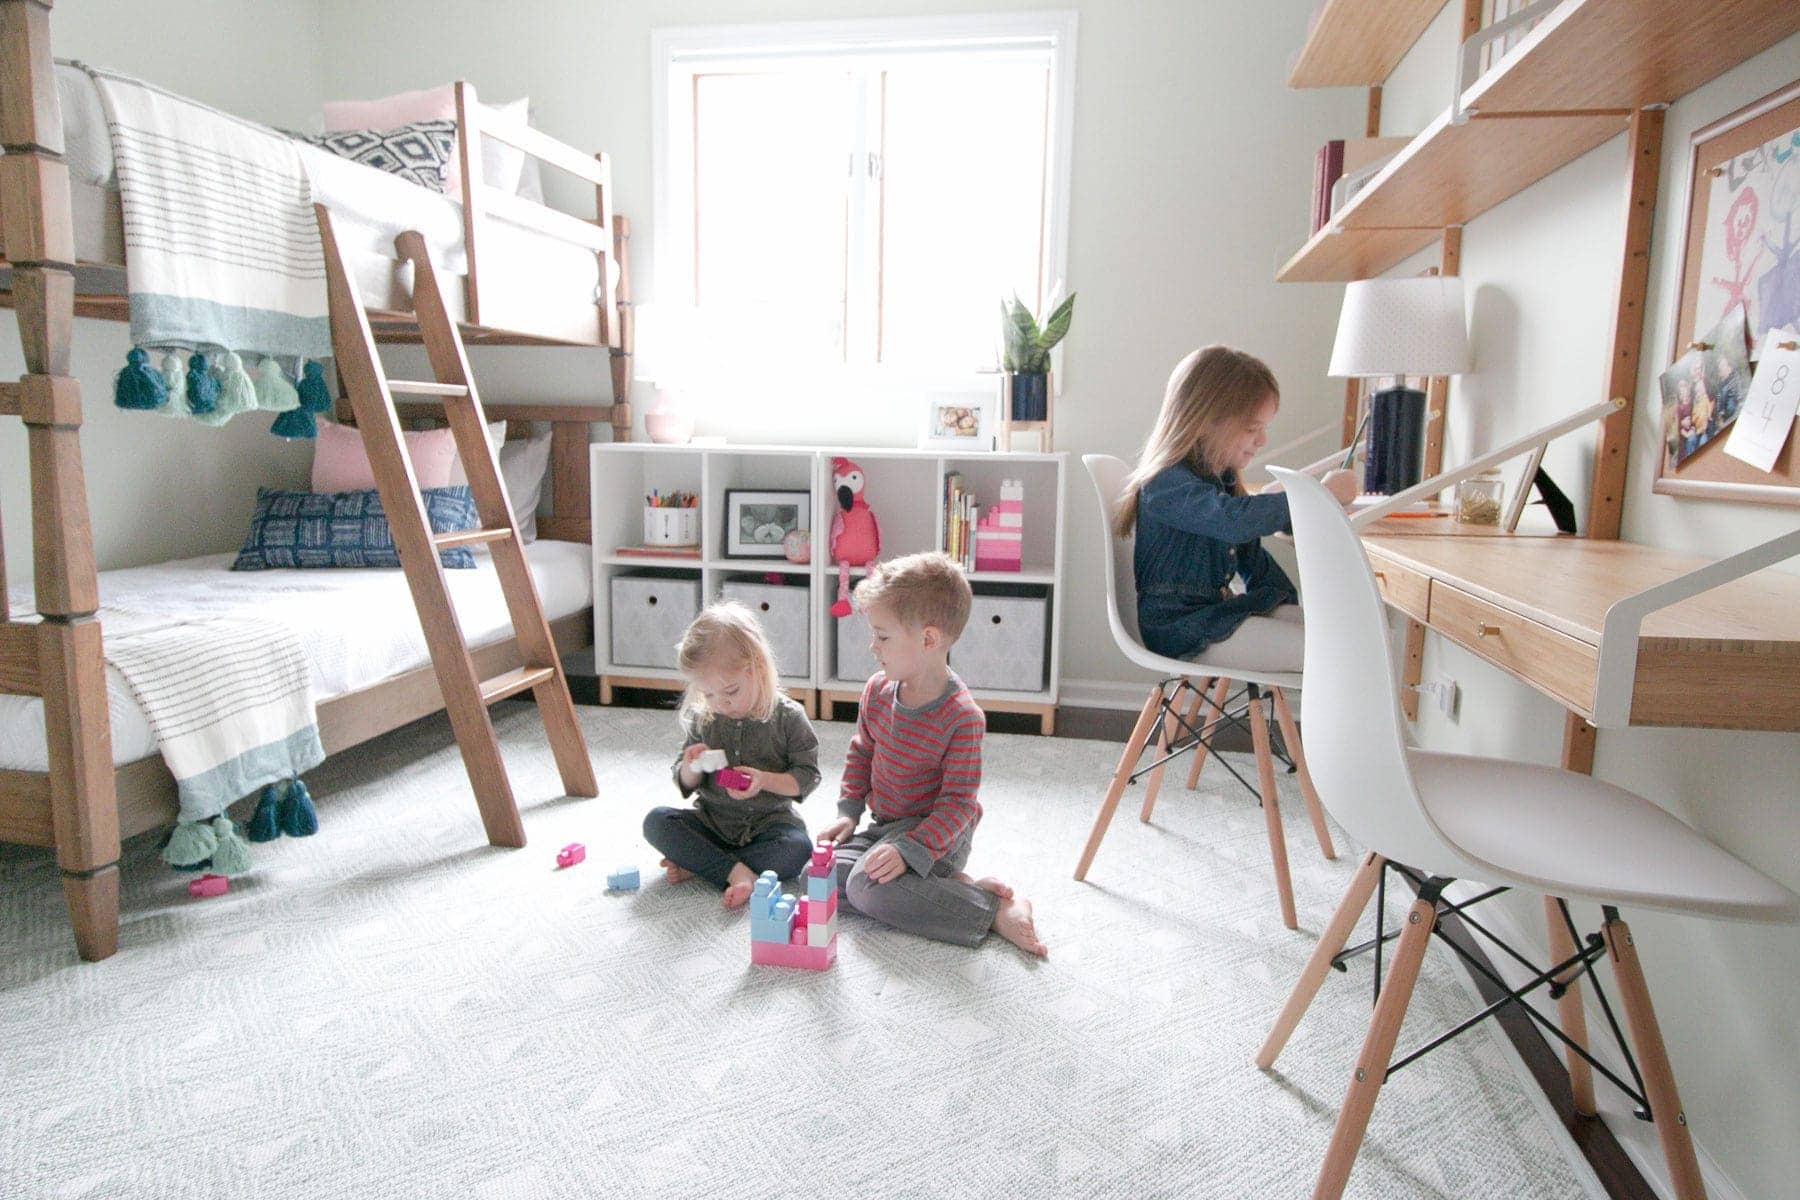 Grandkids enjoying the kids' room makeover with space to play and craft. 